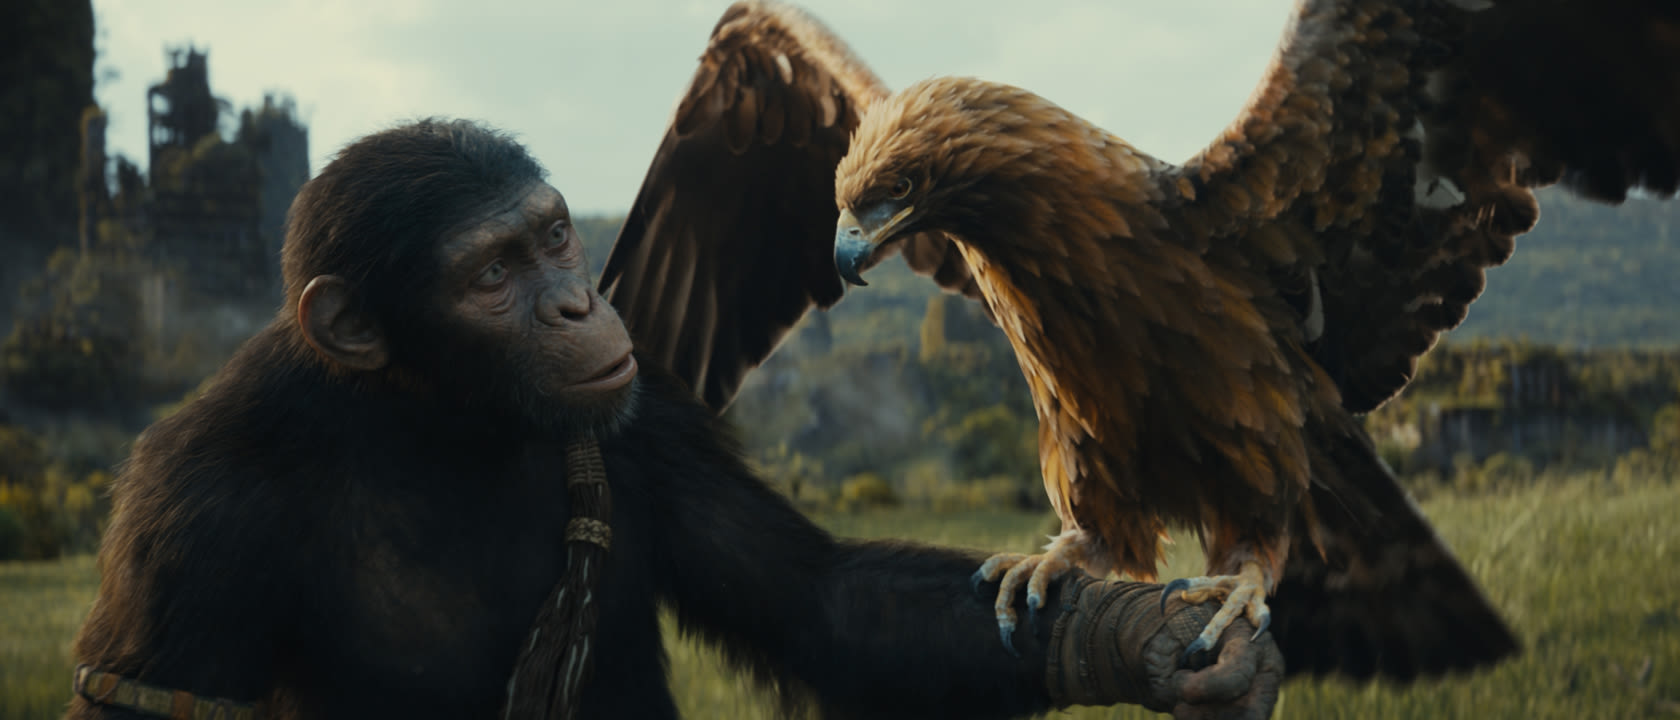 Kingdom Of The Planet Of The Apes Review: While Not Hitting The Heights Of The Caesar Trilogy, The New Apes Movie...